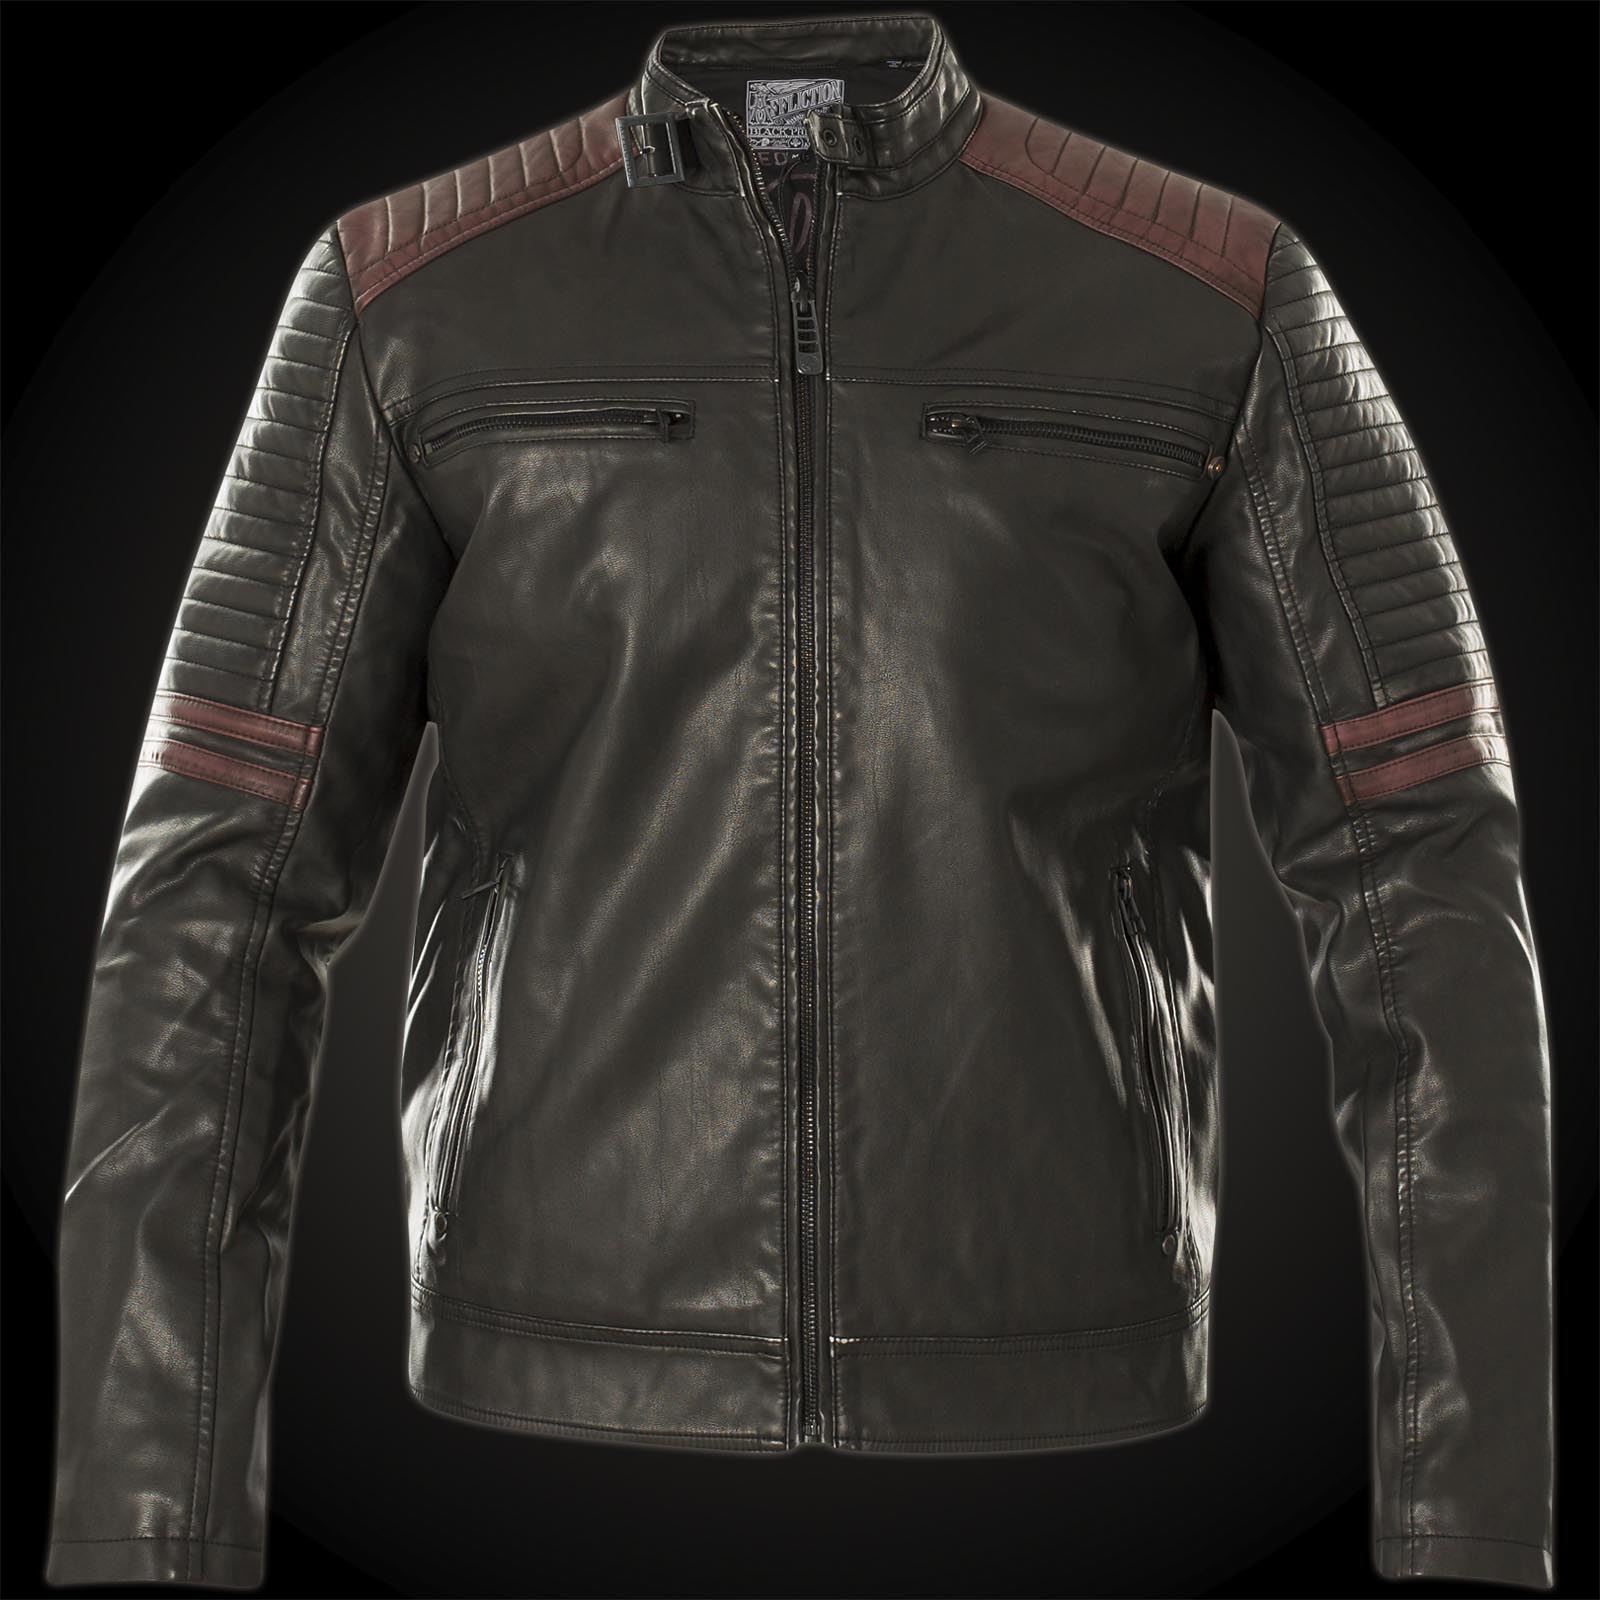 Affliction Horsepower Jacket Faux leather jacket with patches